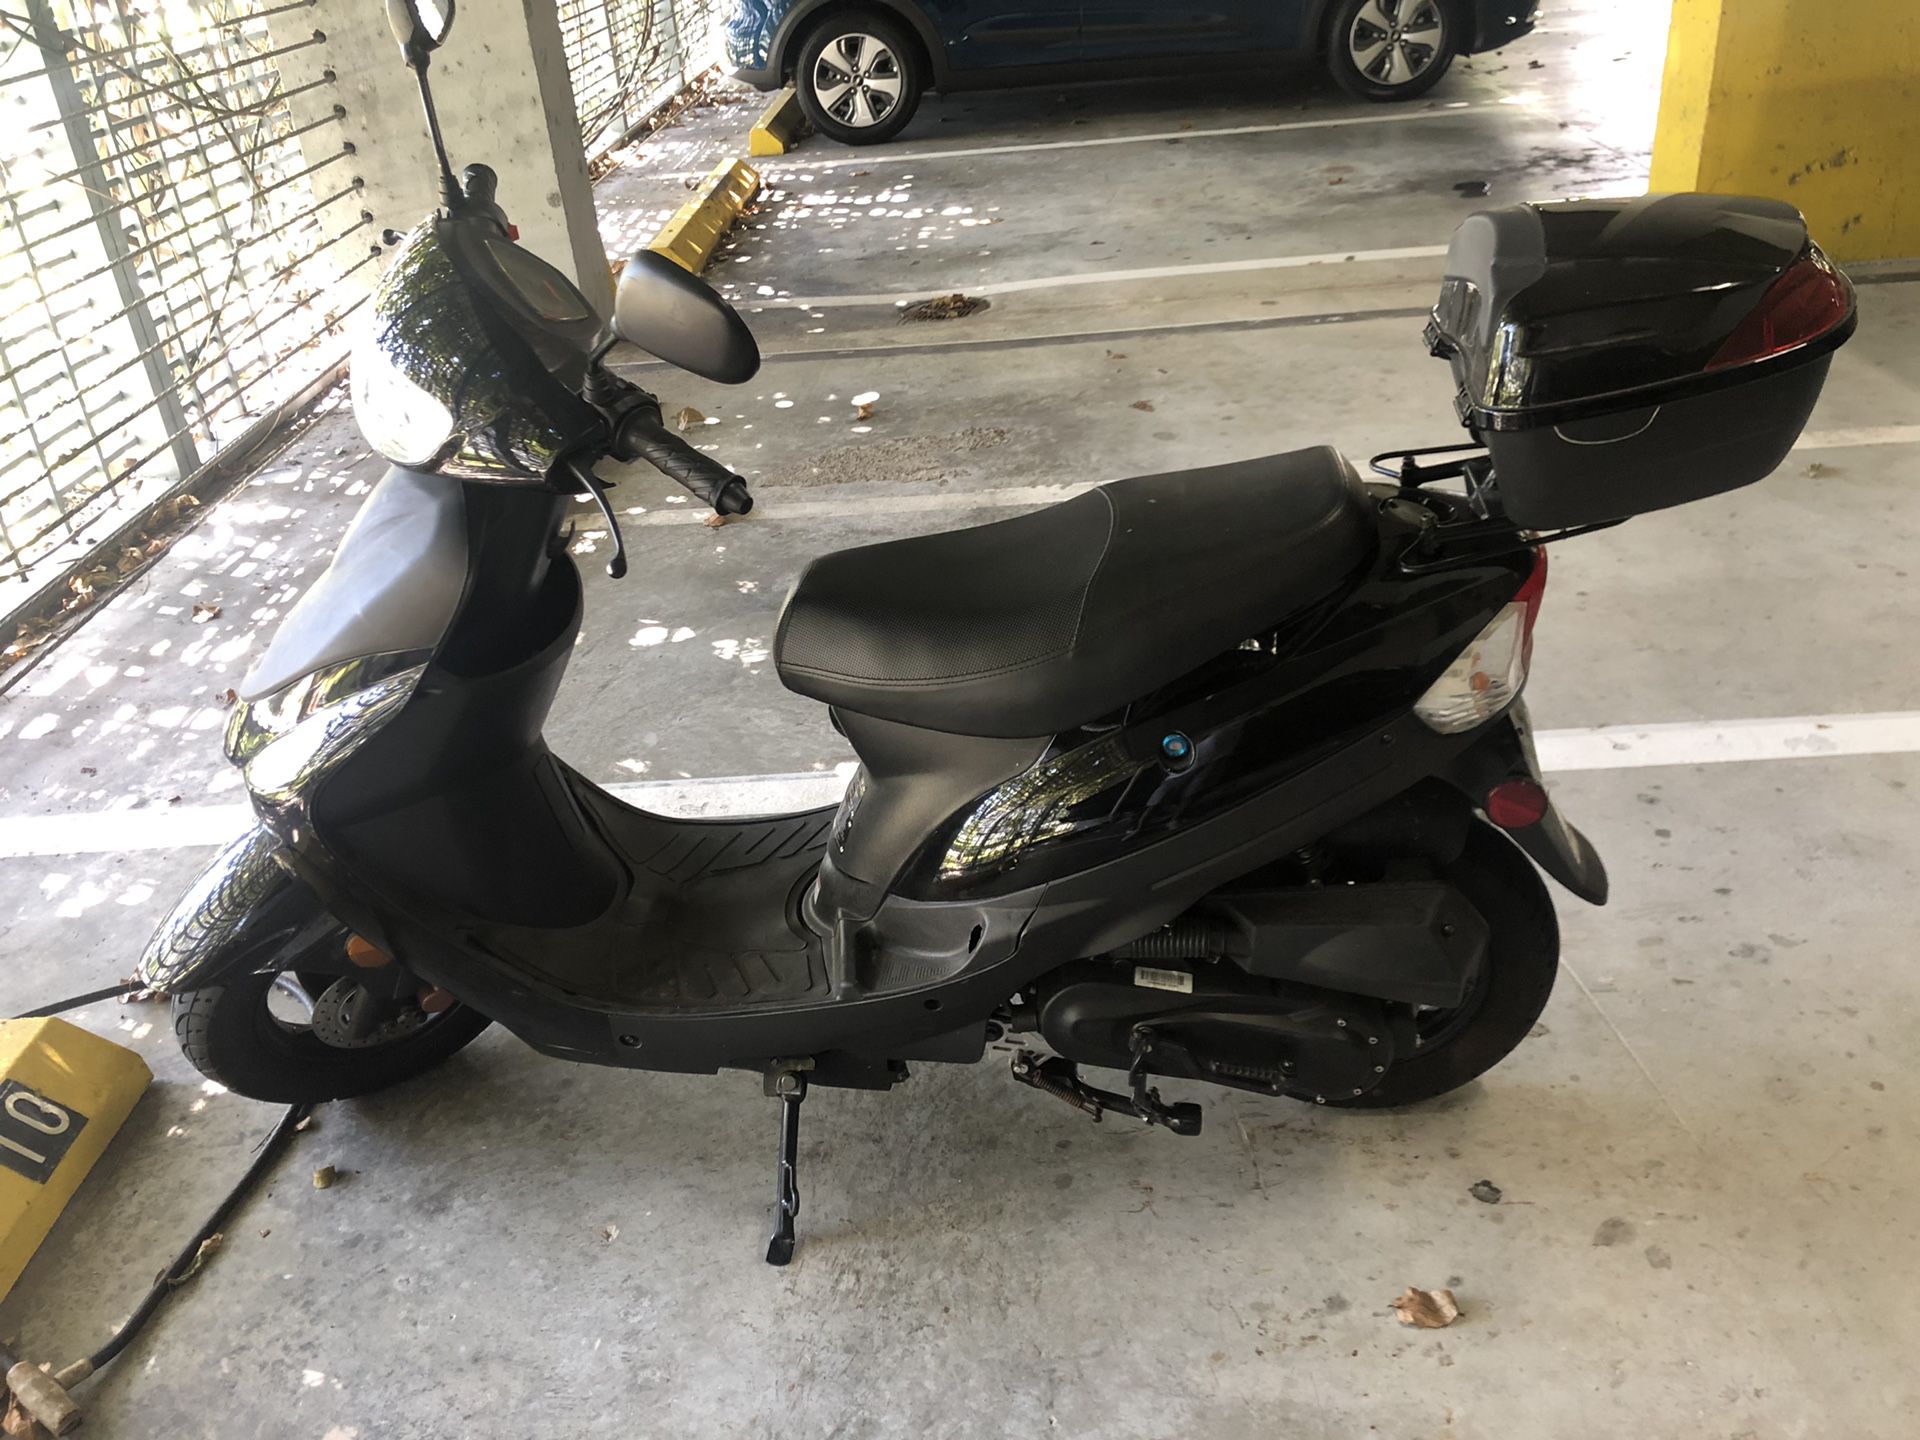 Like New 2019 Tao Tao 50cc Scooter w/ Helmet (Only 200 Miles)